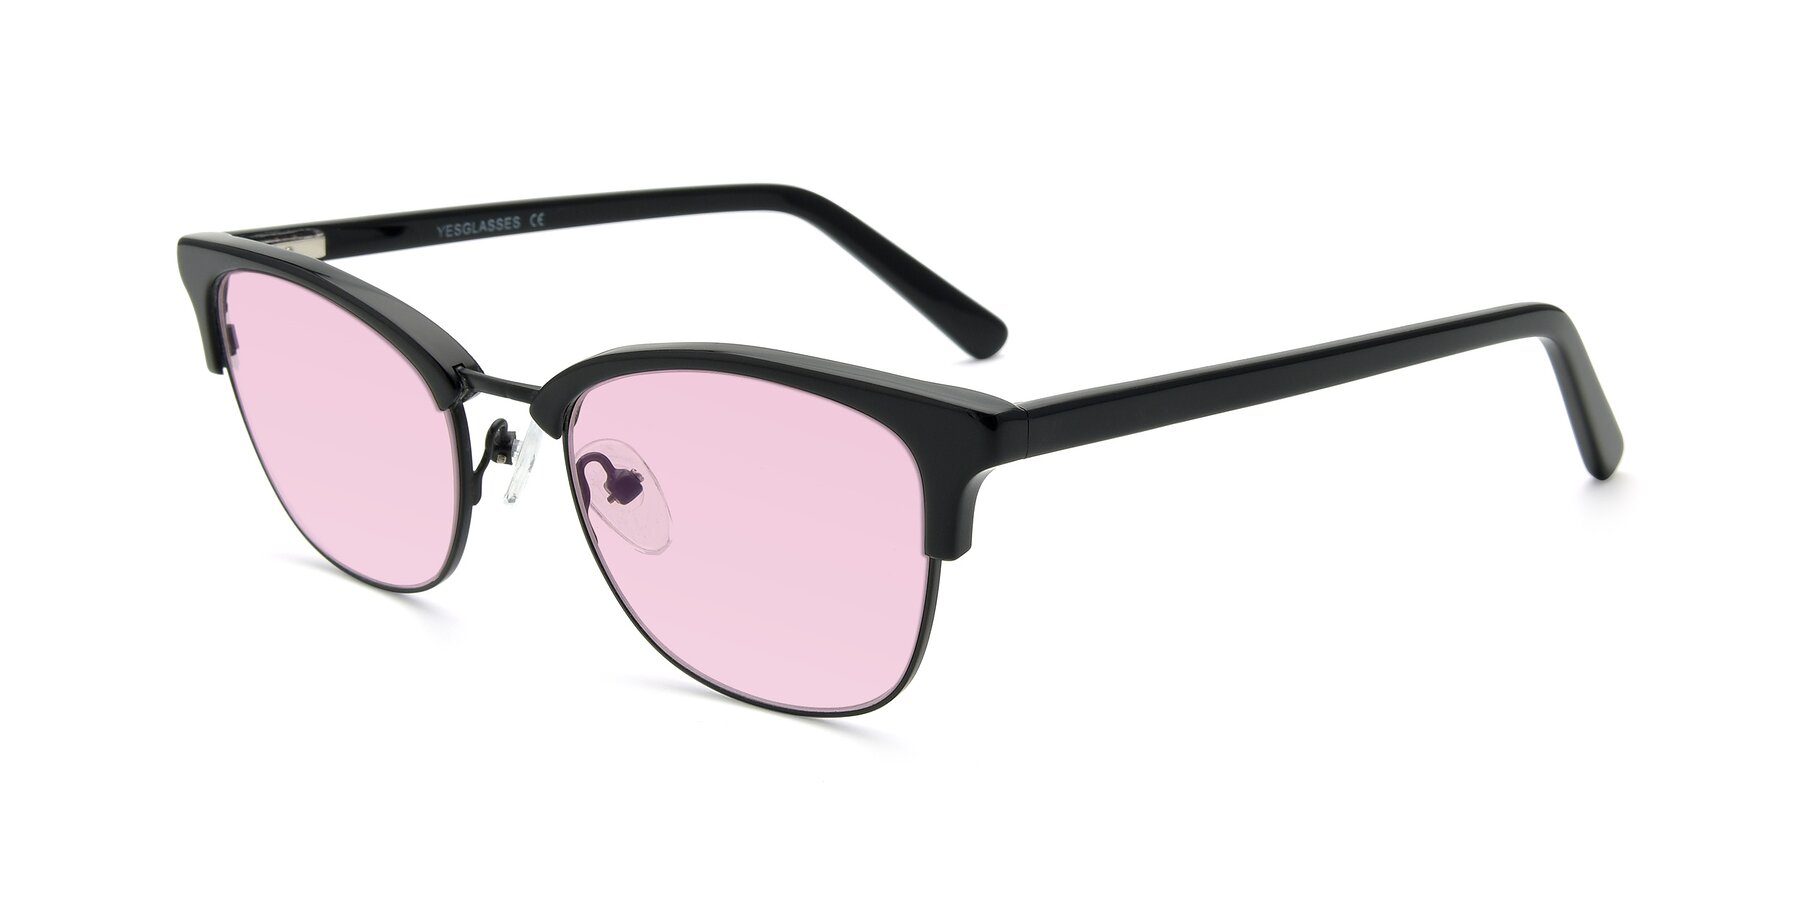 Angle of 17463 in Black with Light Pink Tinted Lenses